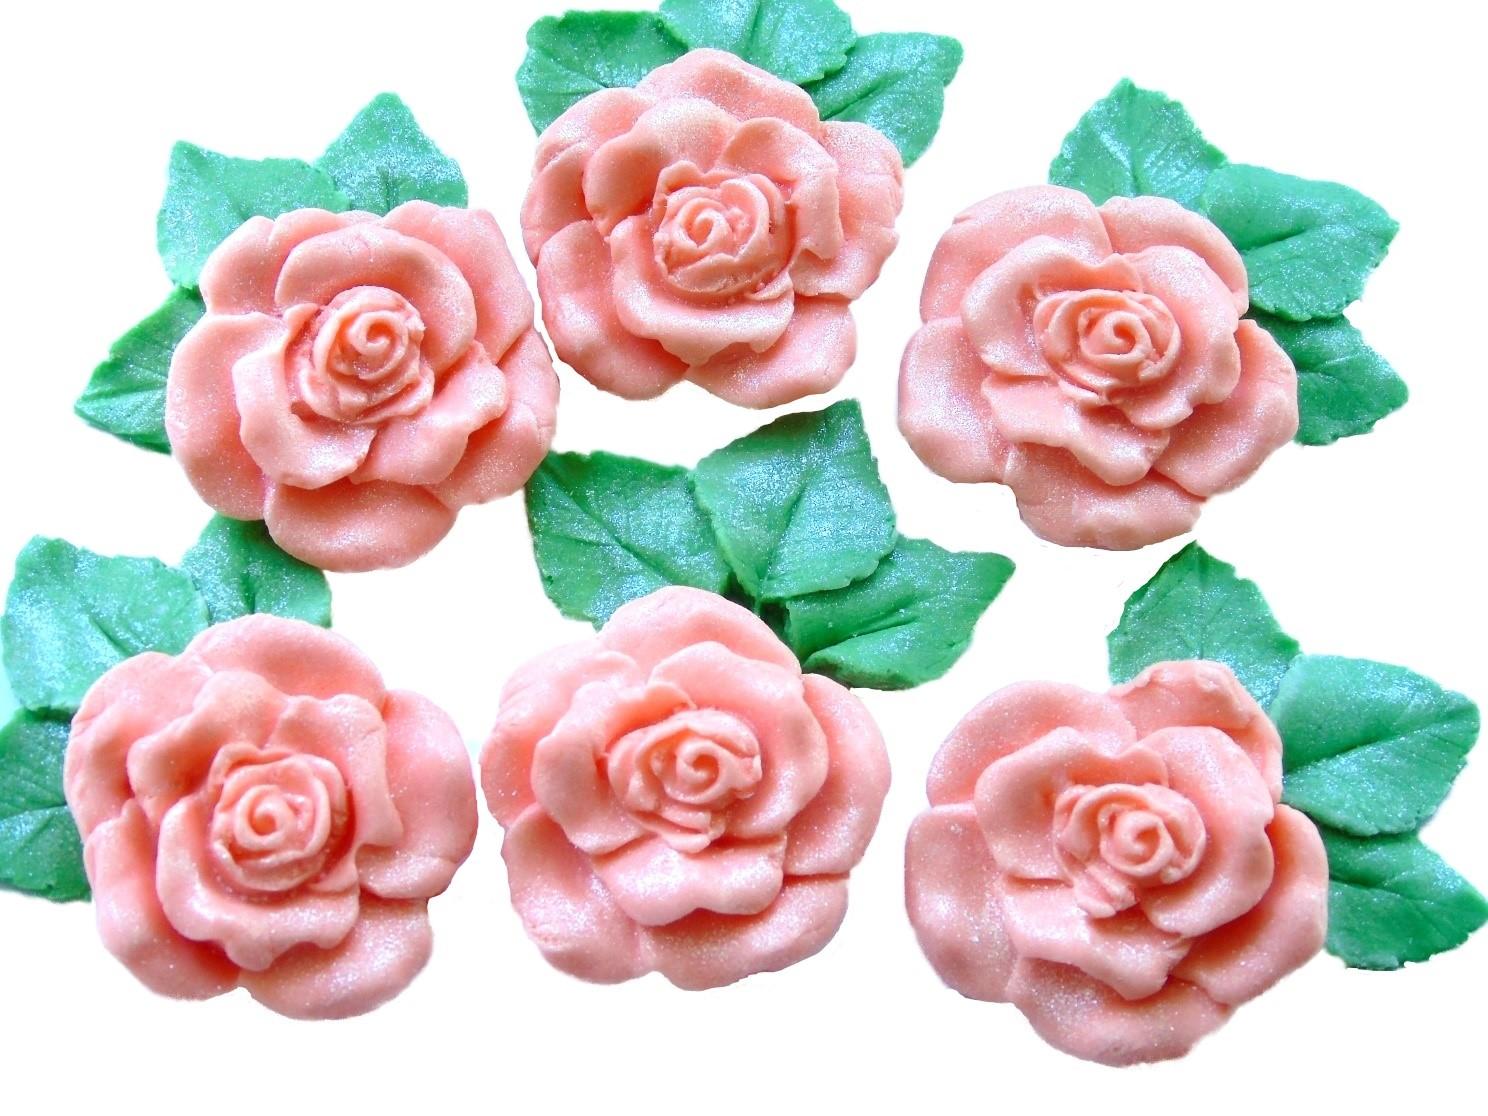 6 Large Peach Glittered Roses with leaves Vegan  Birthday Wedding Cake Toppers